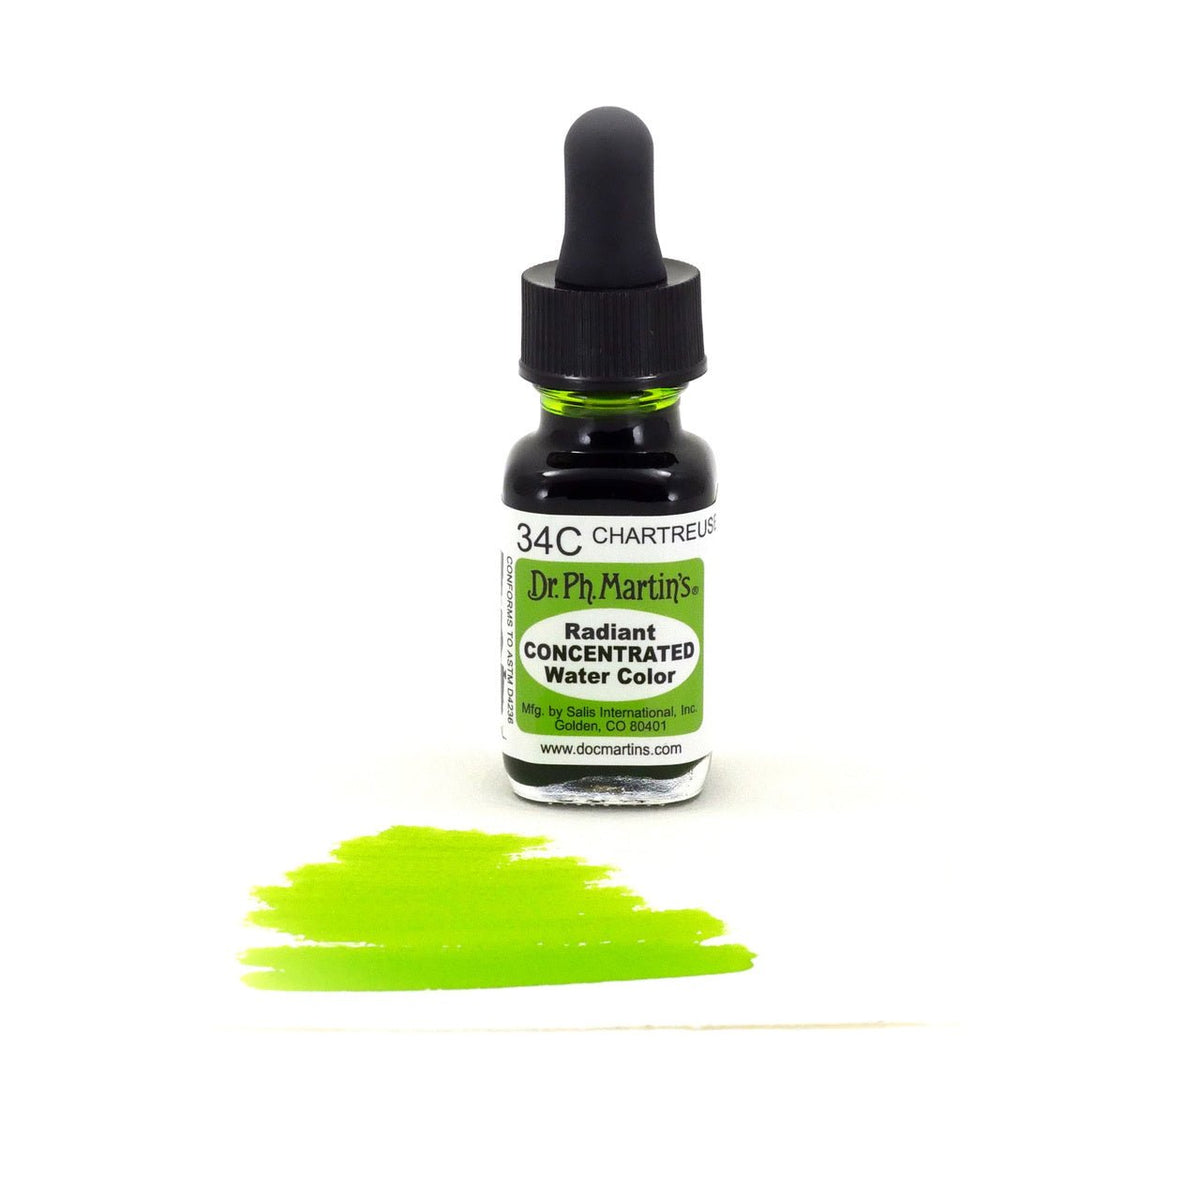 Dr. Ph. Martin's Radiant Watercolor .5 oz - Chartreuse - merriartist.com